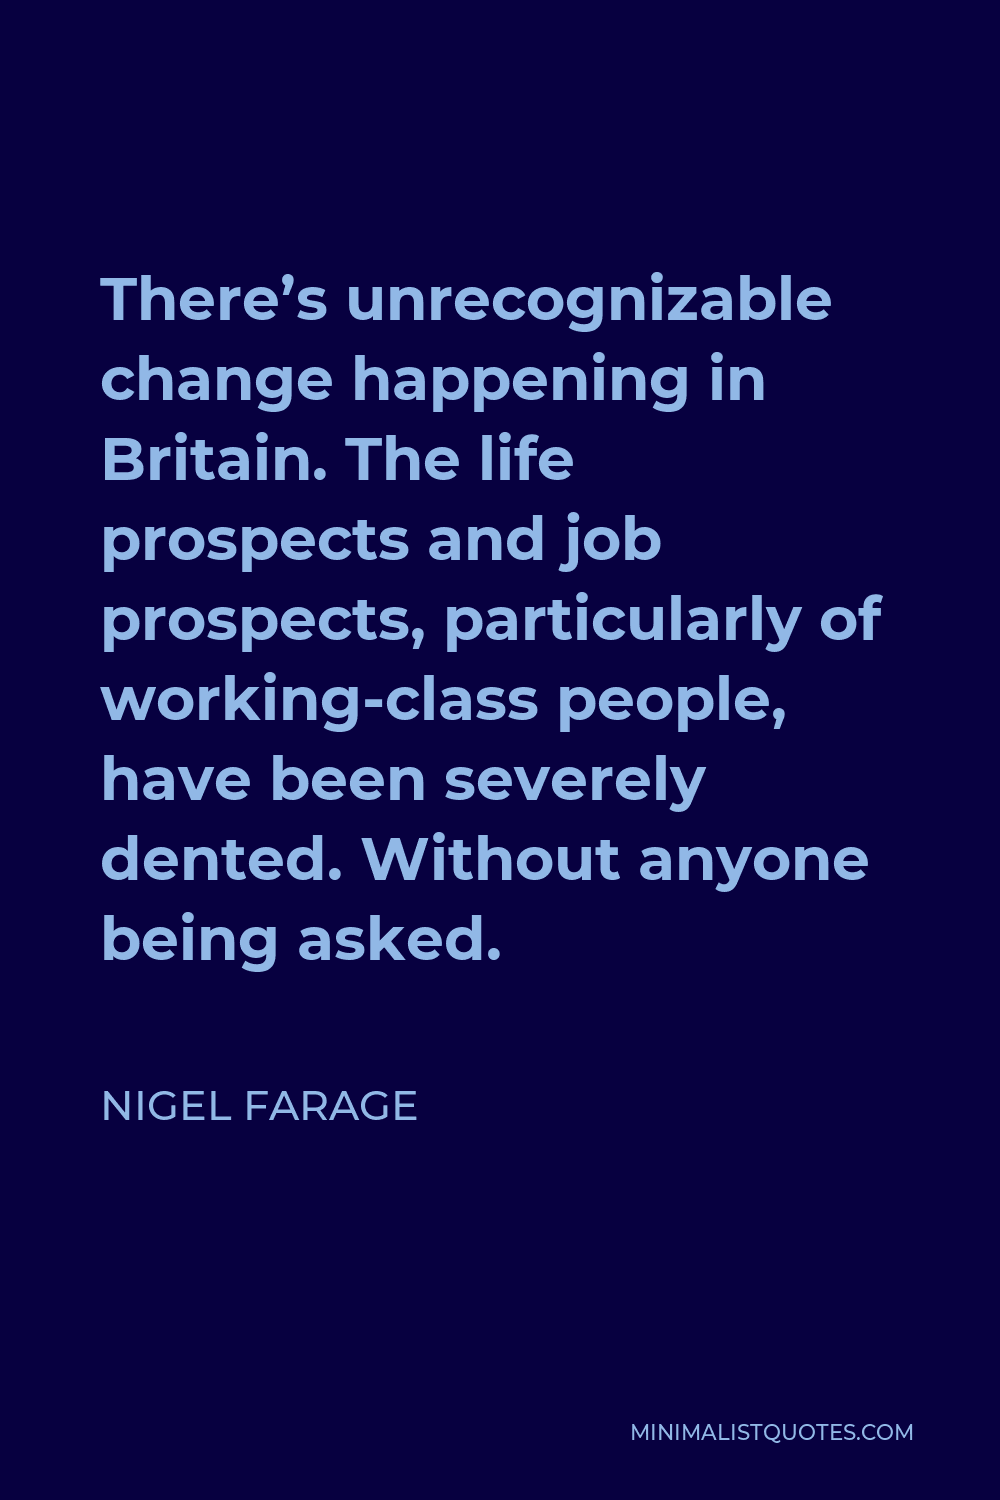 Nigel Farage Quote - There’s unrecognizable change happening in Britain. The life prospects and job prospects, particularly of working-class people, have been severely dented. Without anyone being asked.